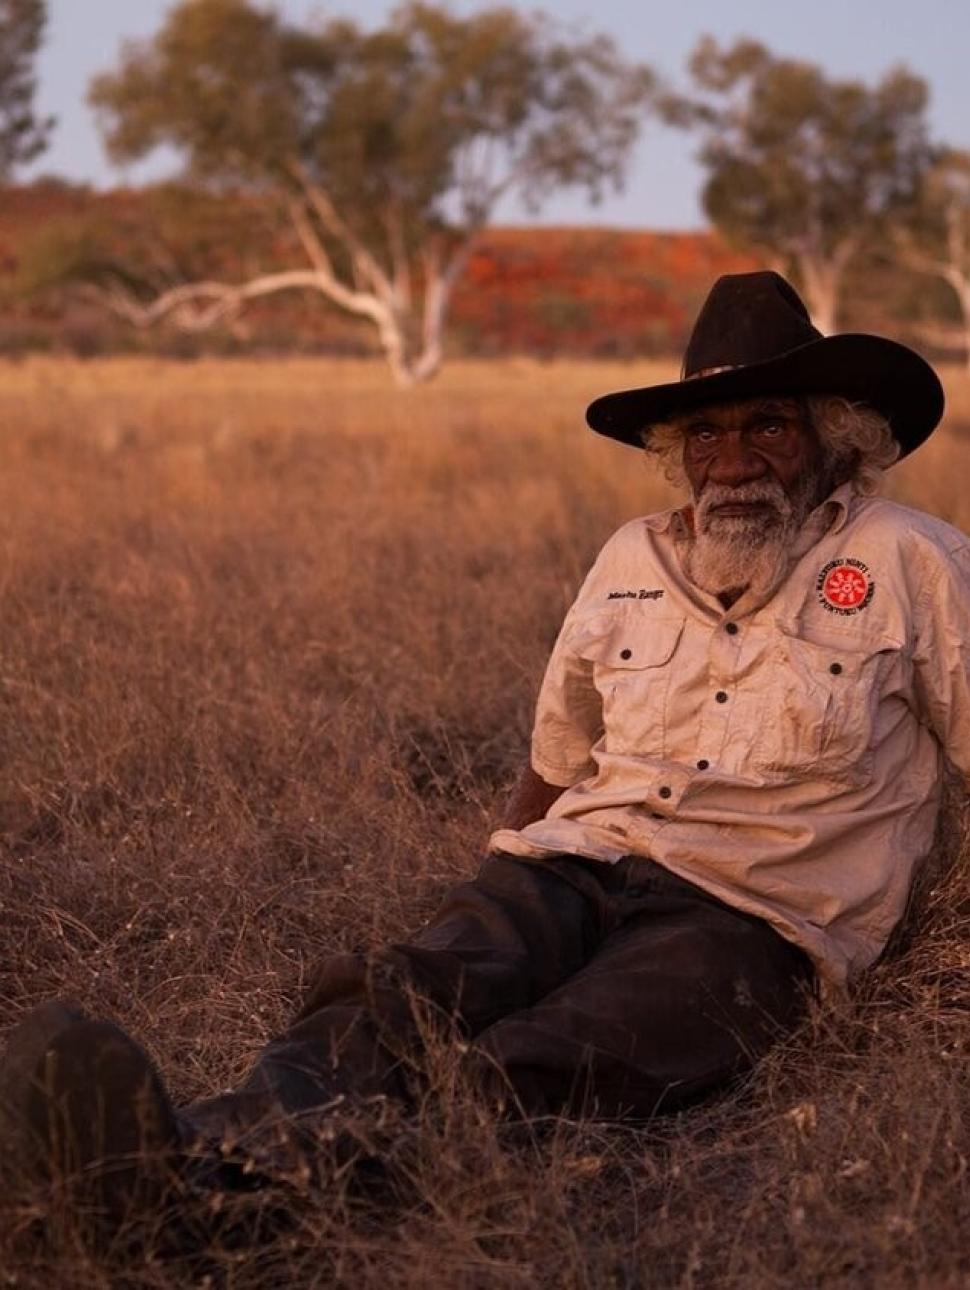 Aboriginal elder Nyarri Nyarri Morgan wears a khaki coloured ranger shirt and a black stockmans hat and sits out on country at dusk, with the trees and grass beginning to darken behind him.